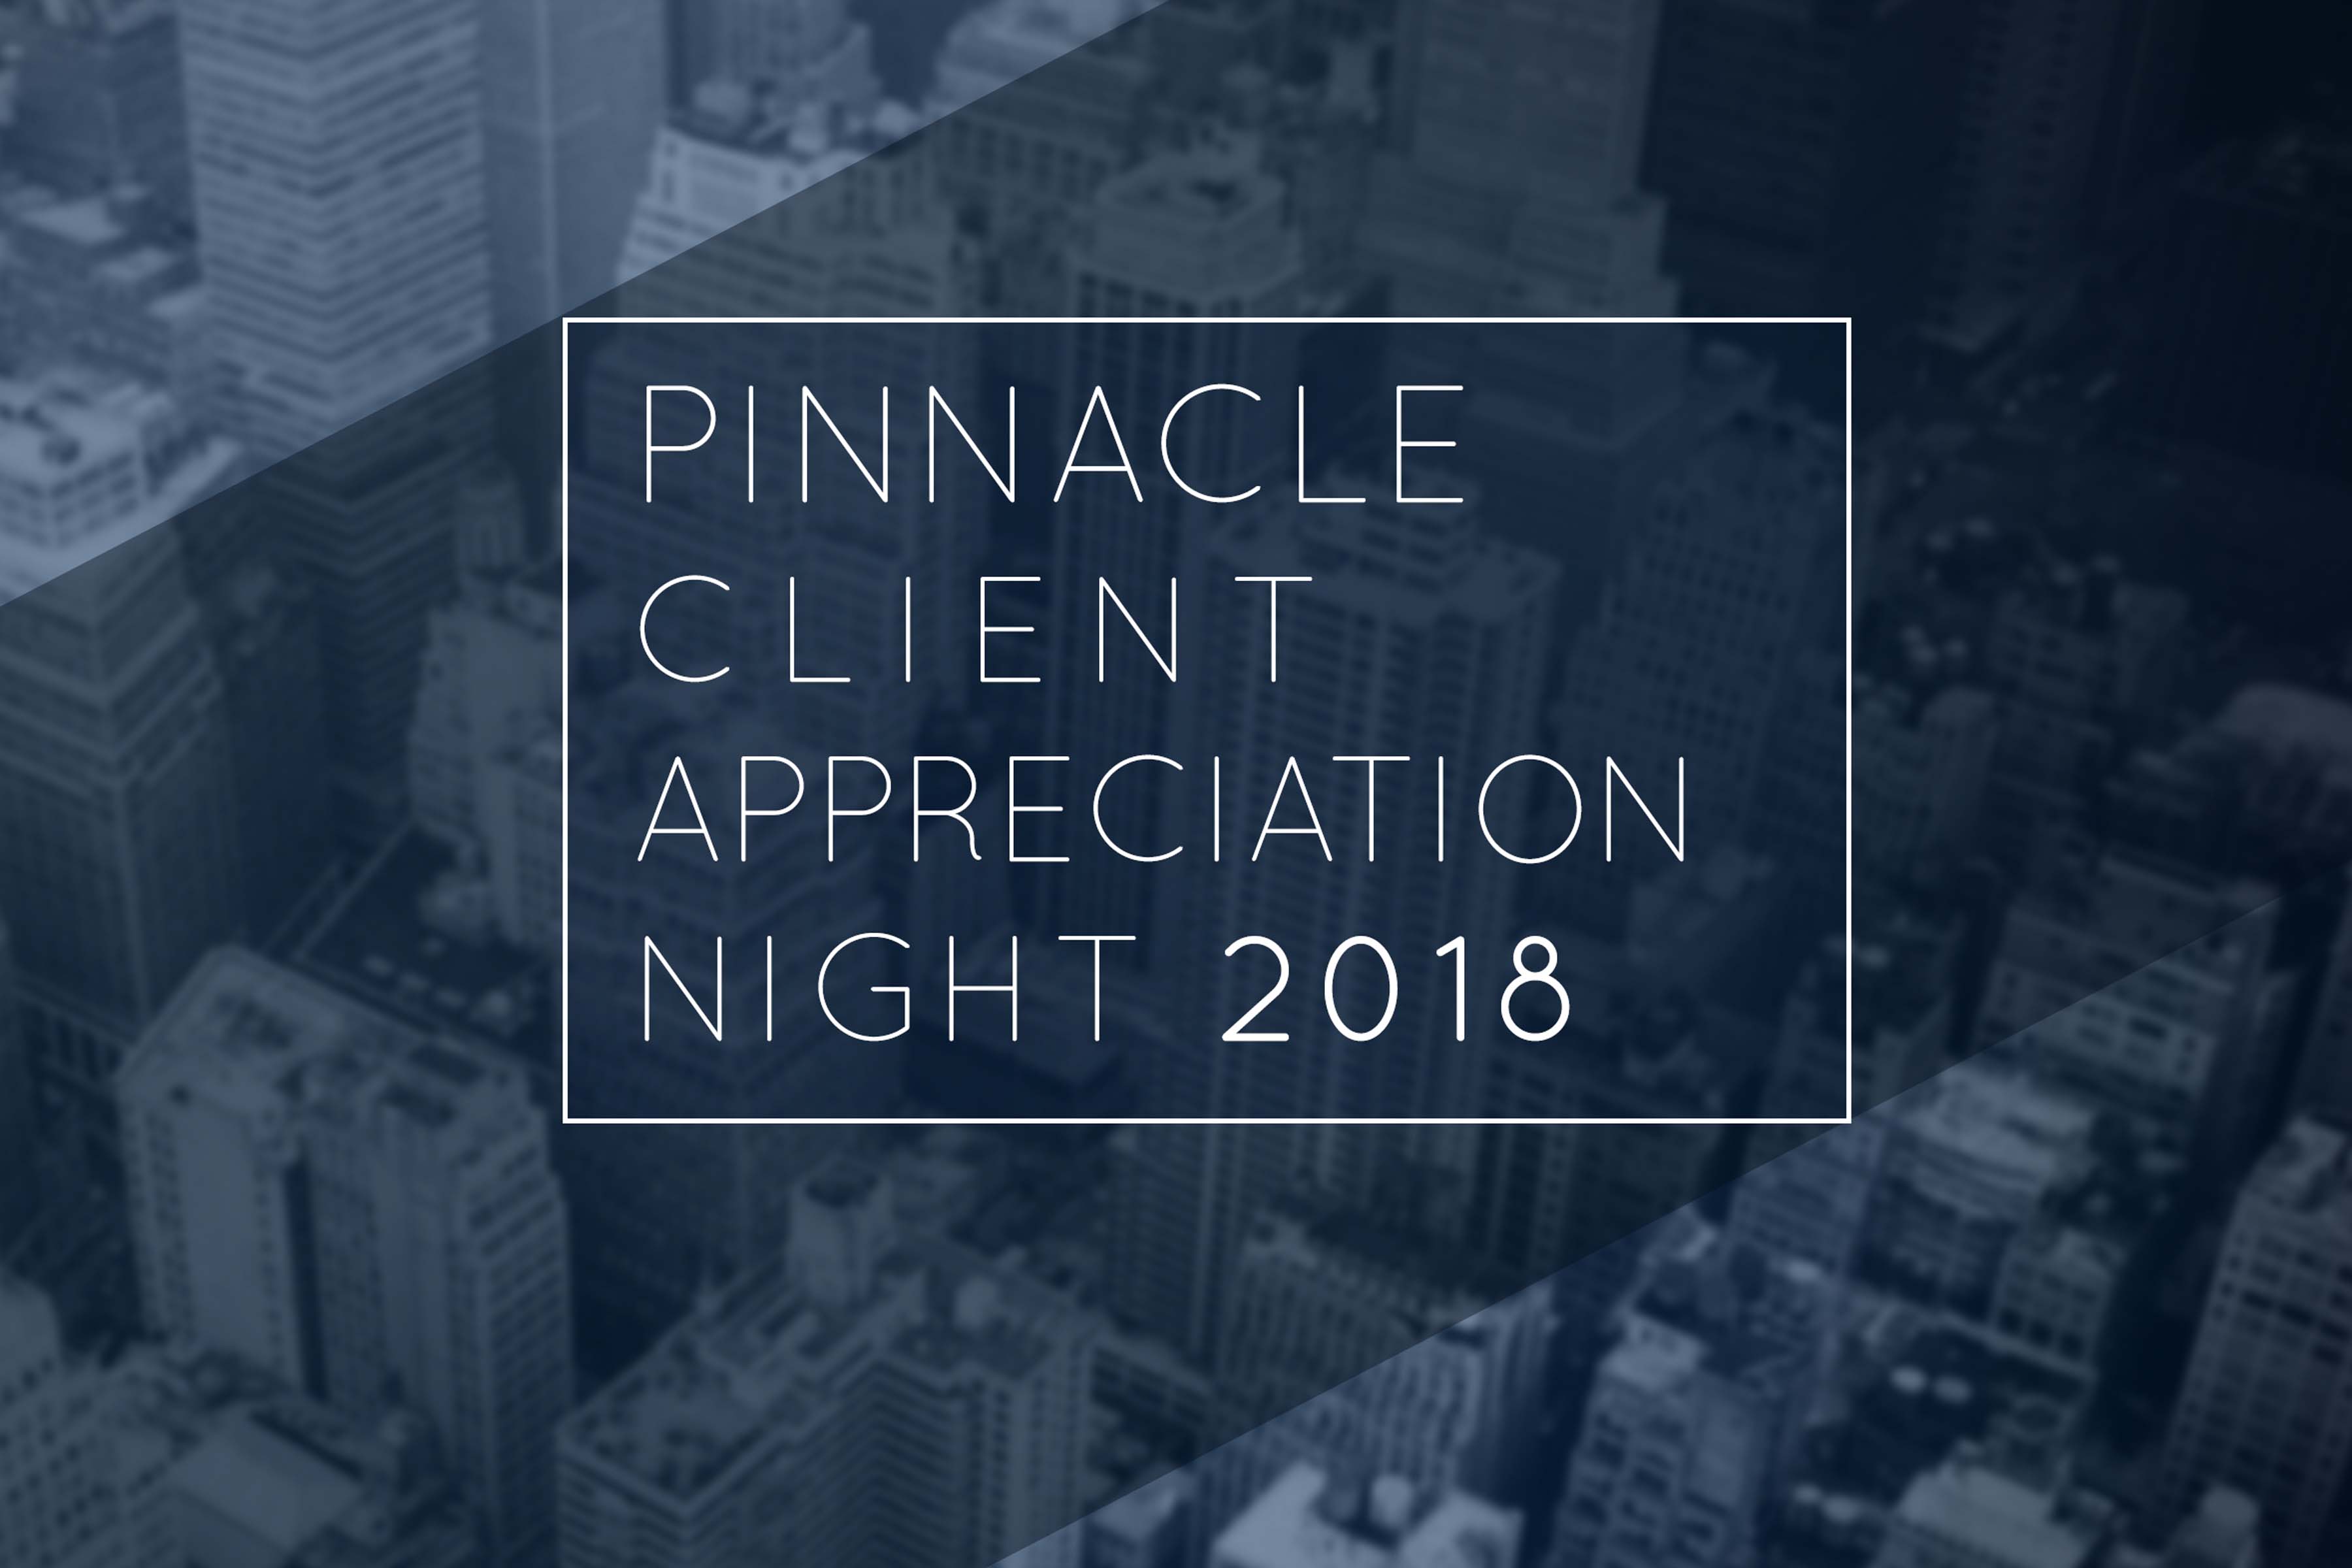 Top clients, partners recognized at Pinnacle’s Client Appreciation Night 2018